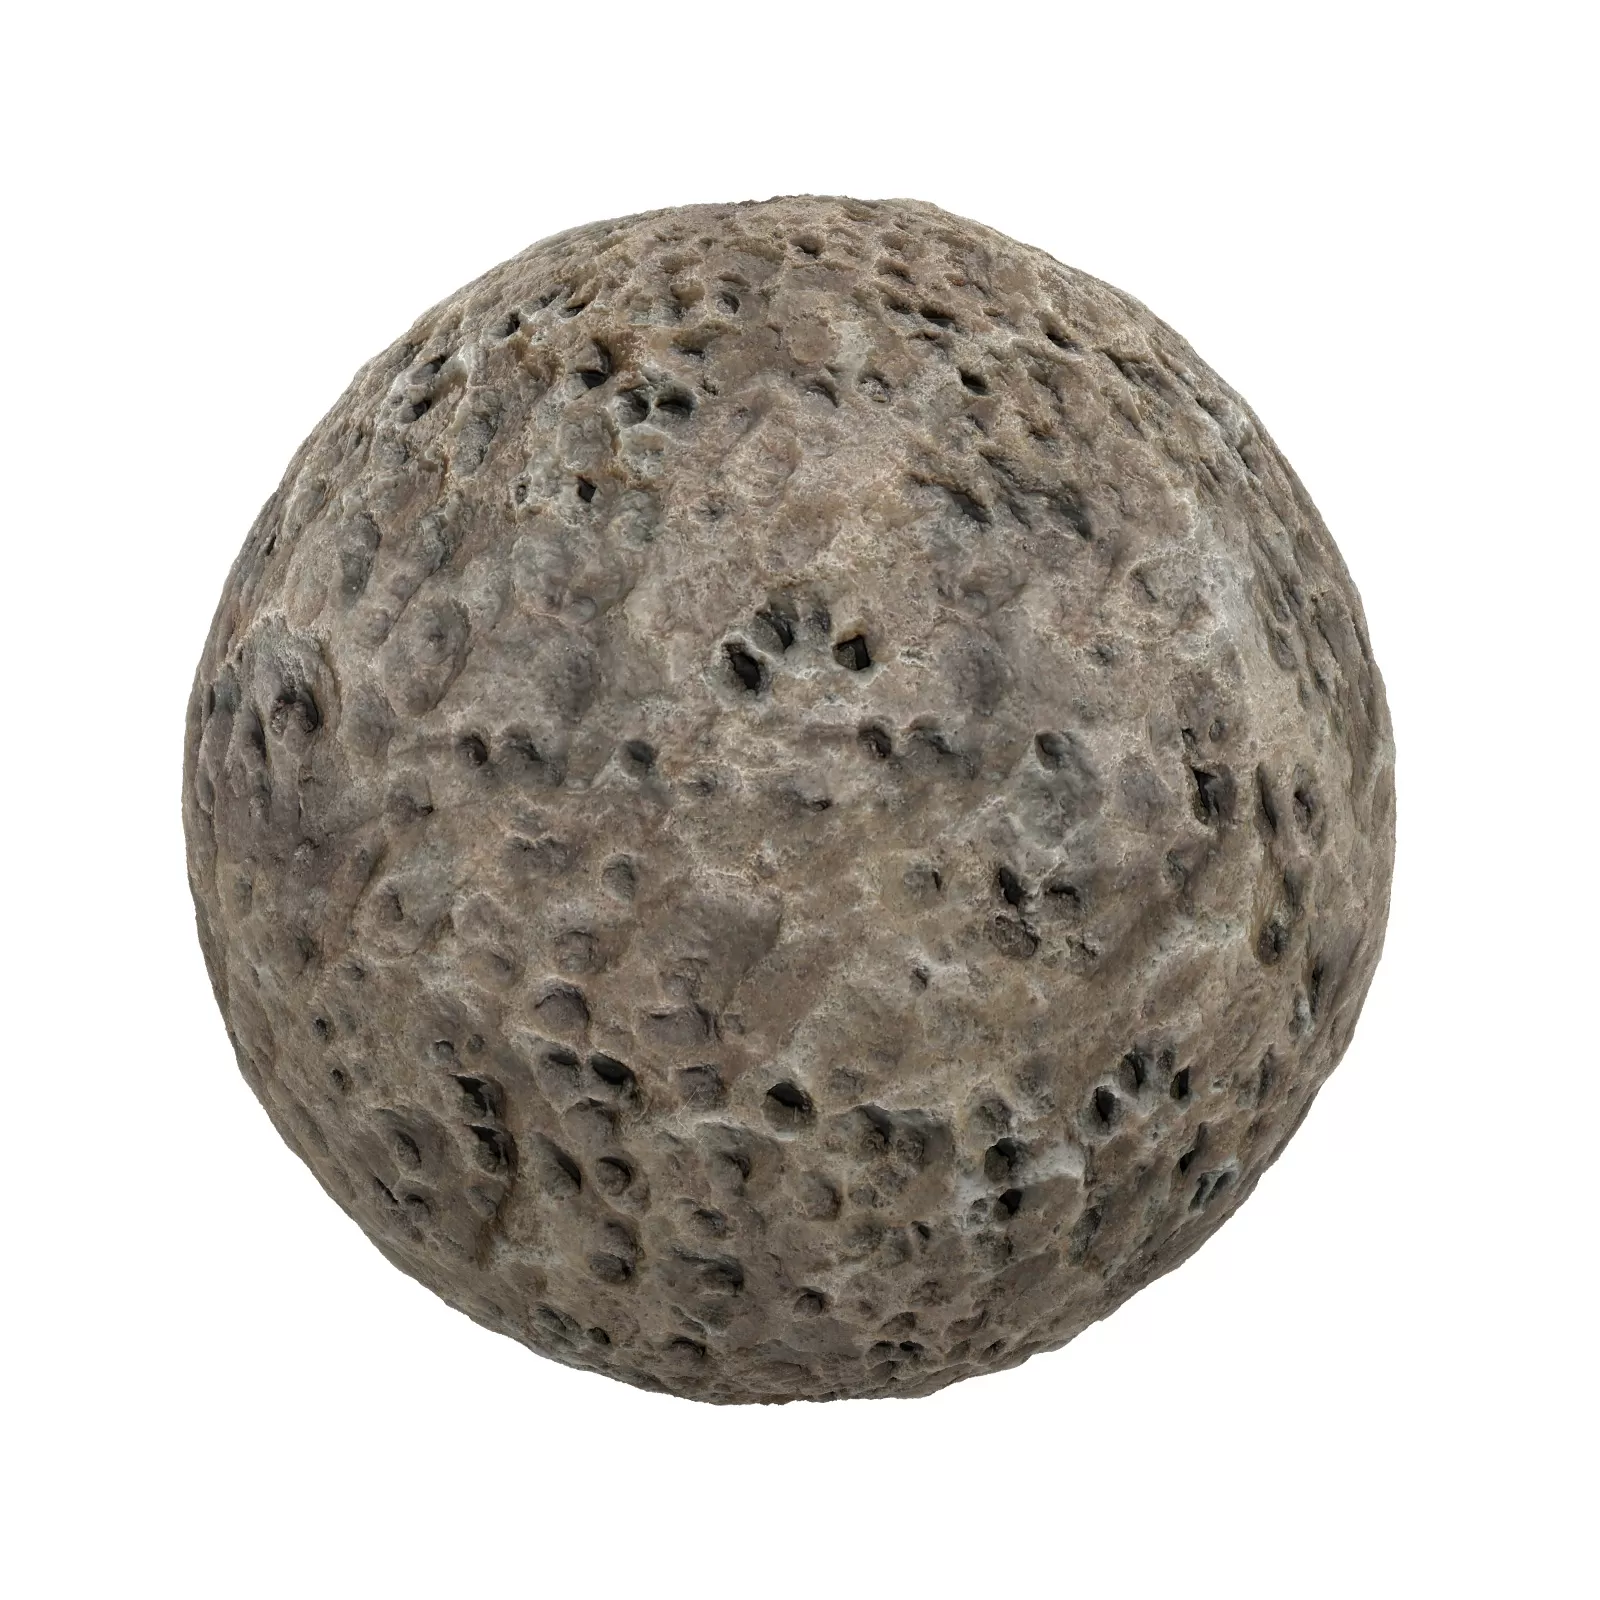 TEXTURES – STONES – CGAxis PBR Colection Vol 1 Stones – brown rock with holes